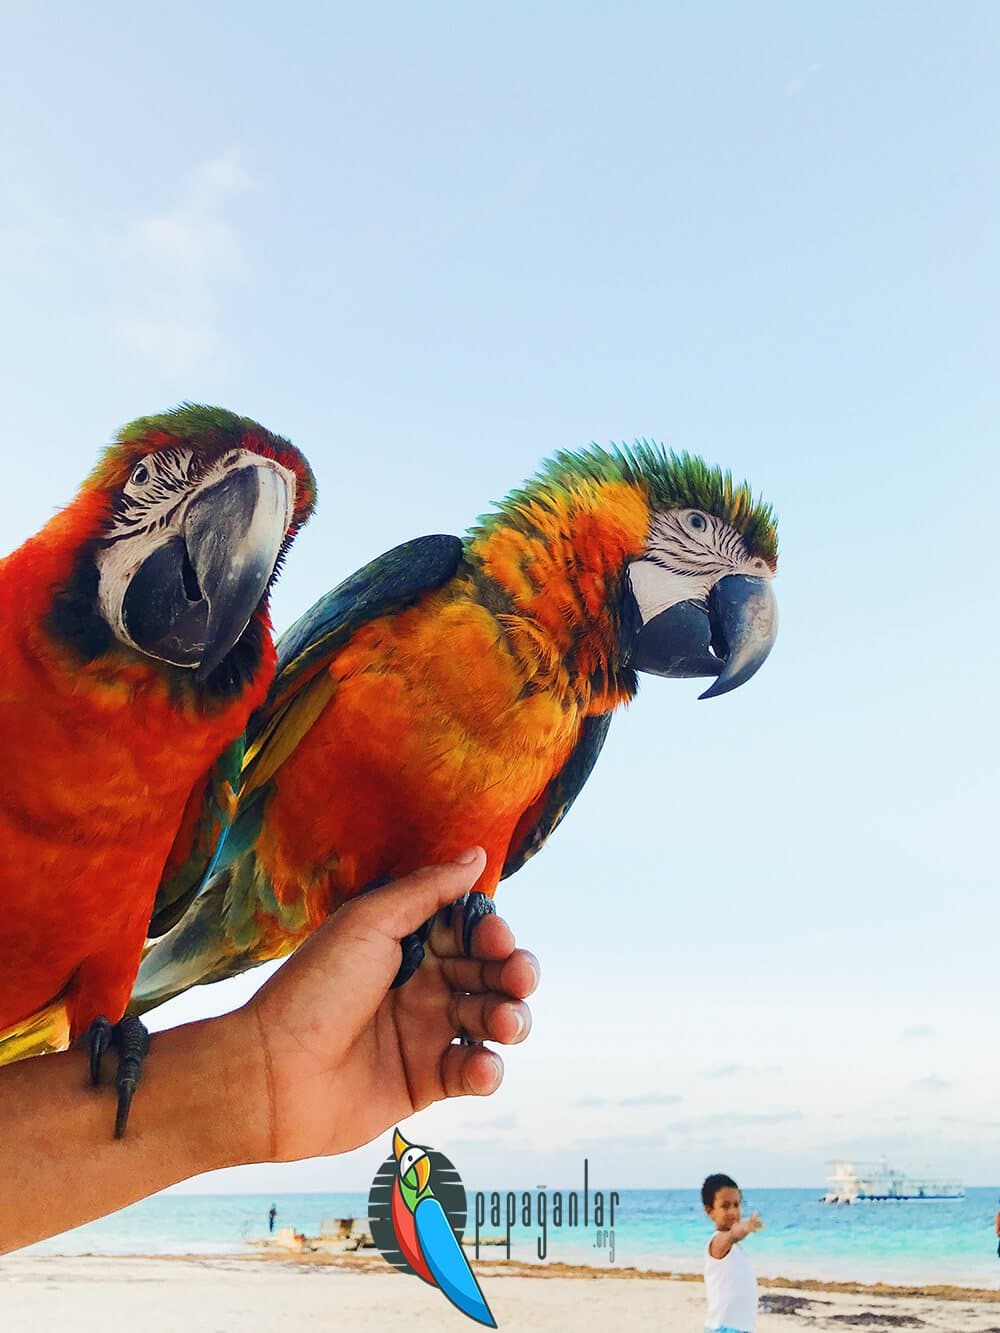 What does it mean to see a parrot in a dream?